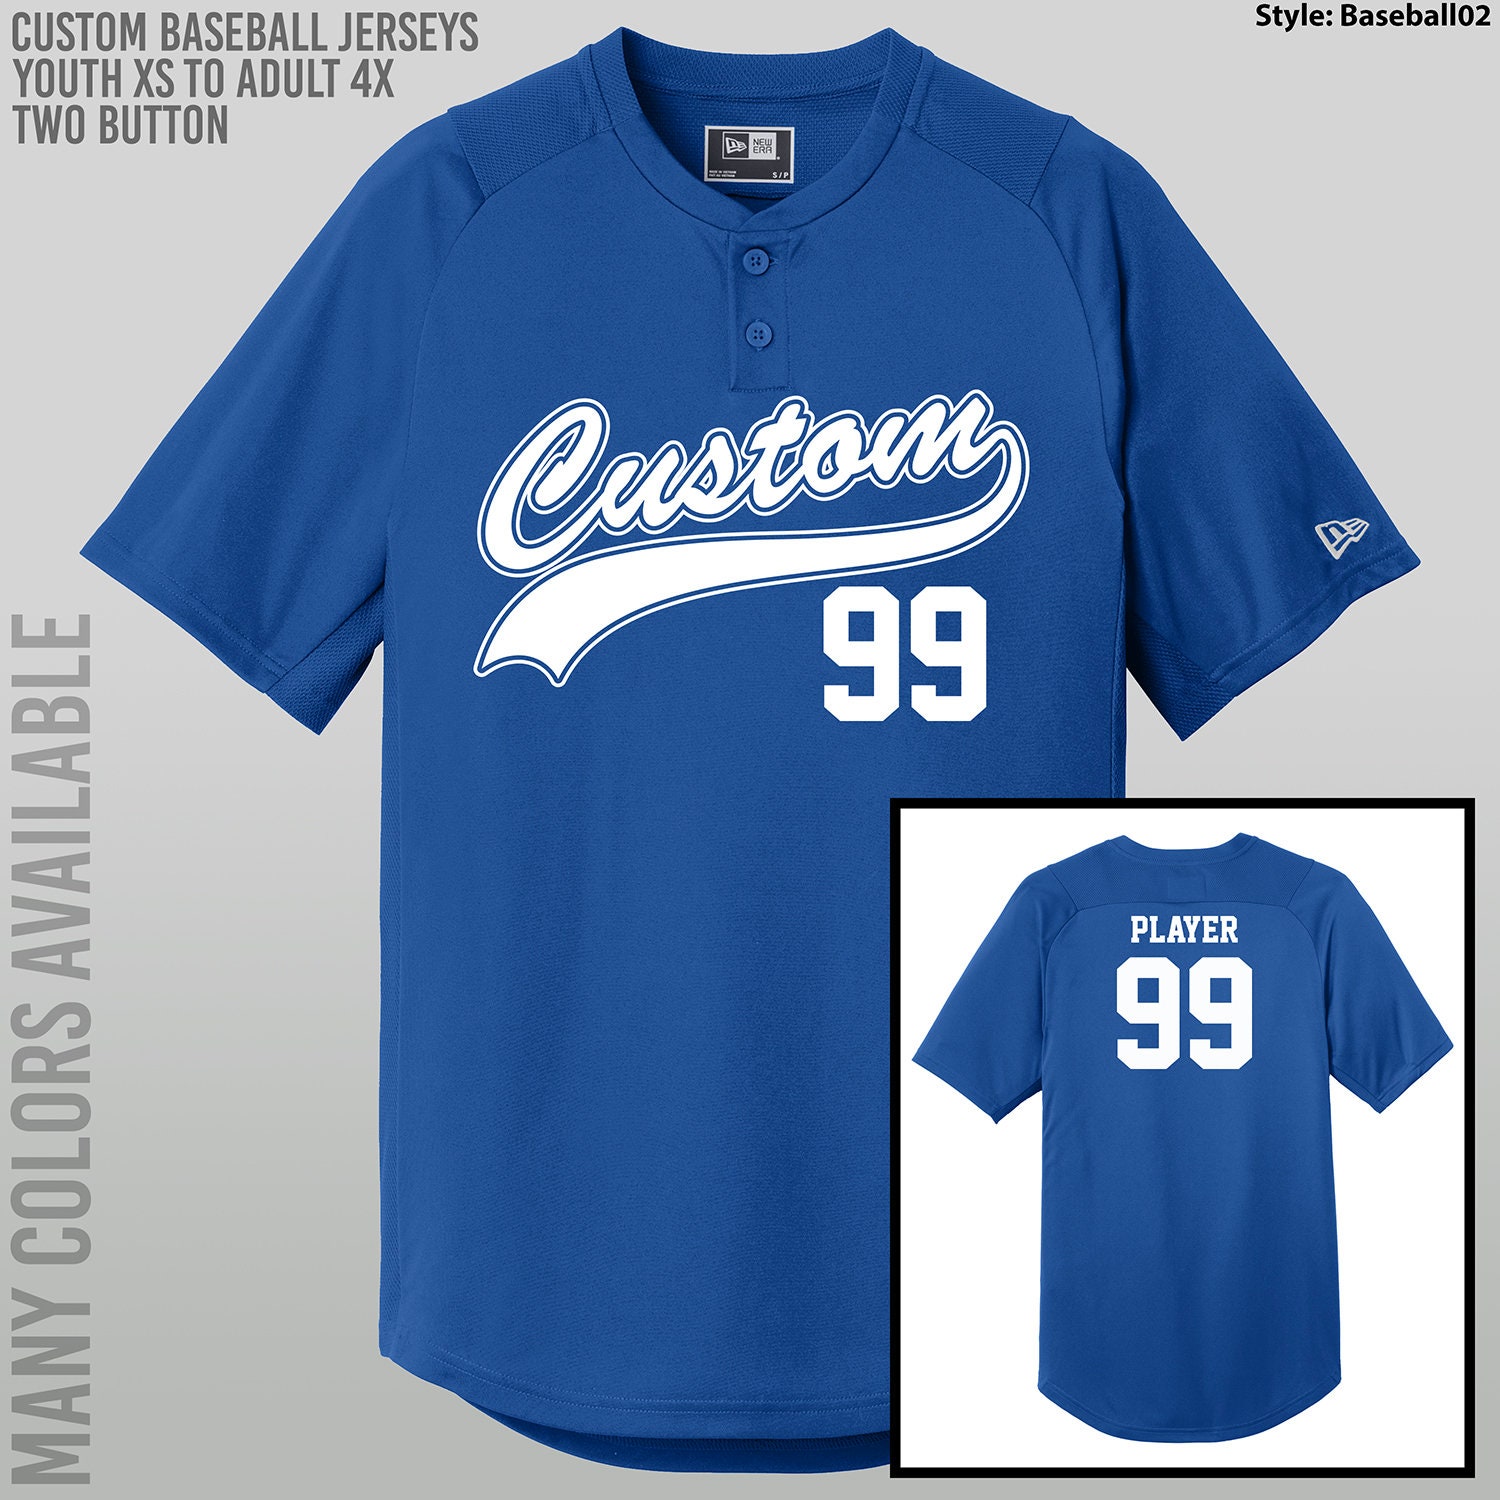 Custom Baseball Jerseys / Two Button / Youth XS to Adult 4X